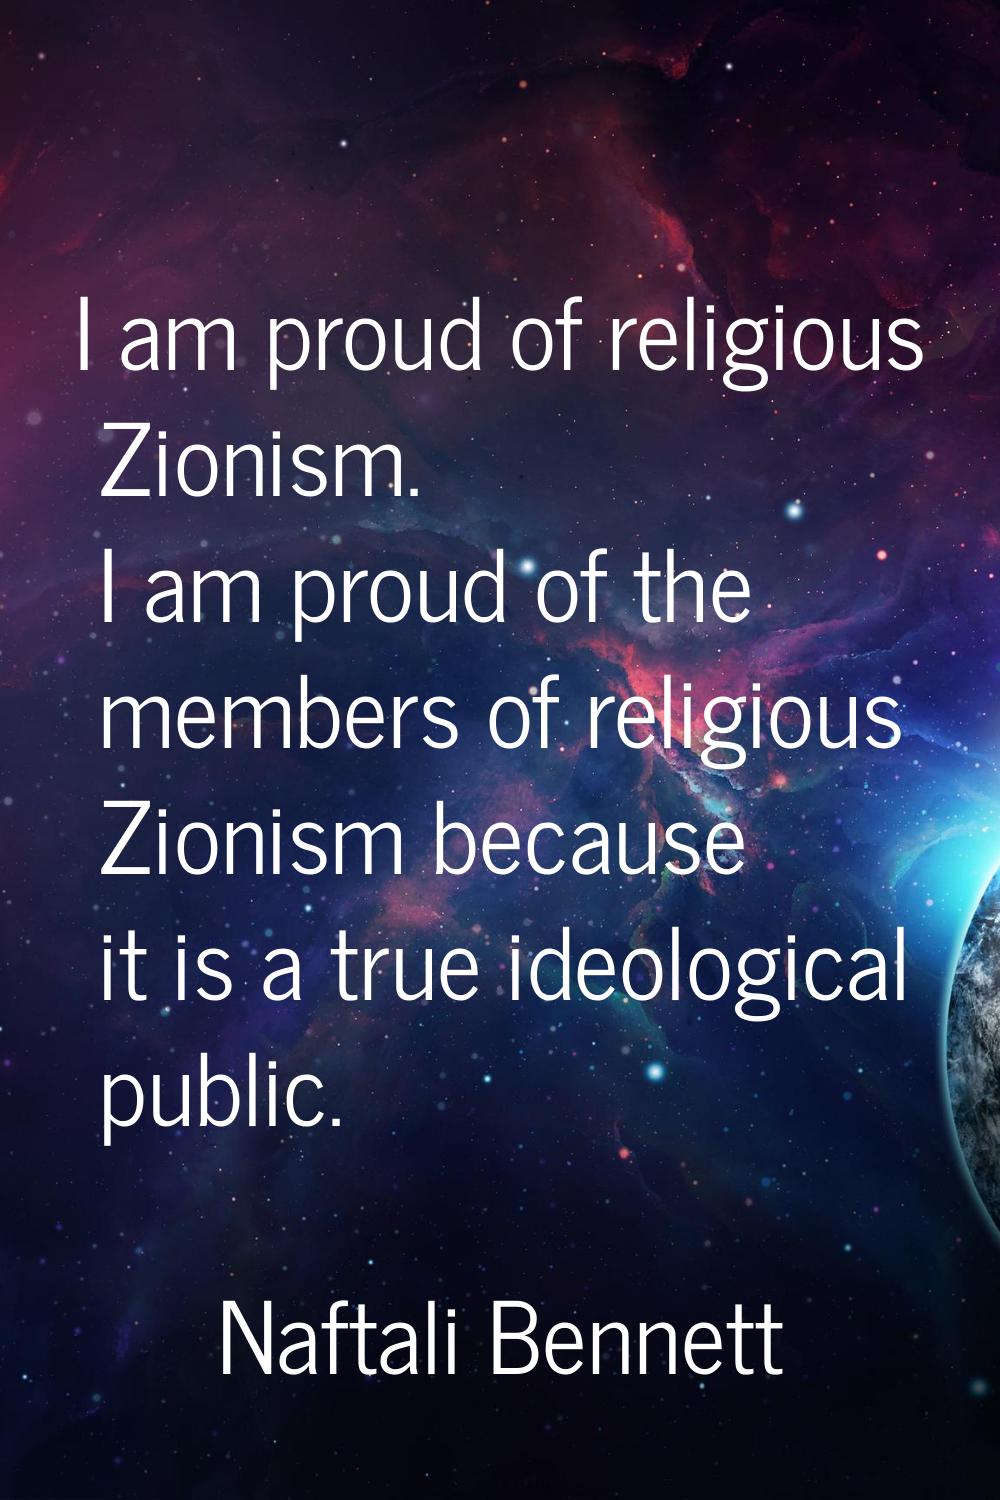 I am proud of religious Zionism. I am proud of the members of religious Zionism because it is a tru